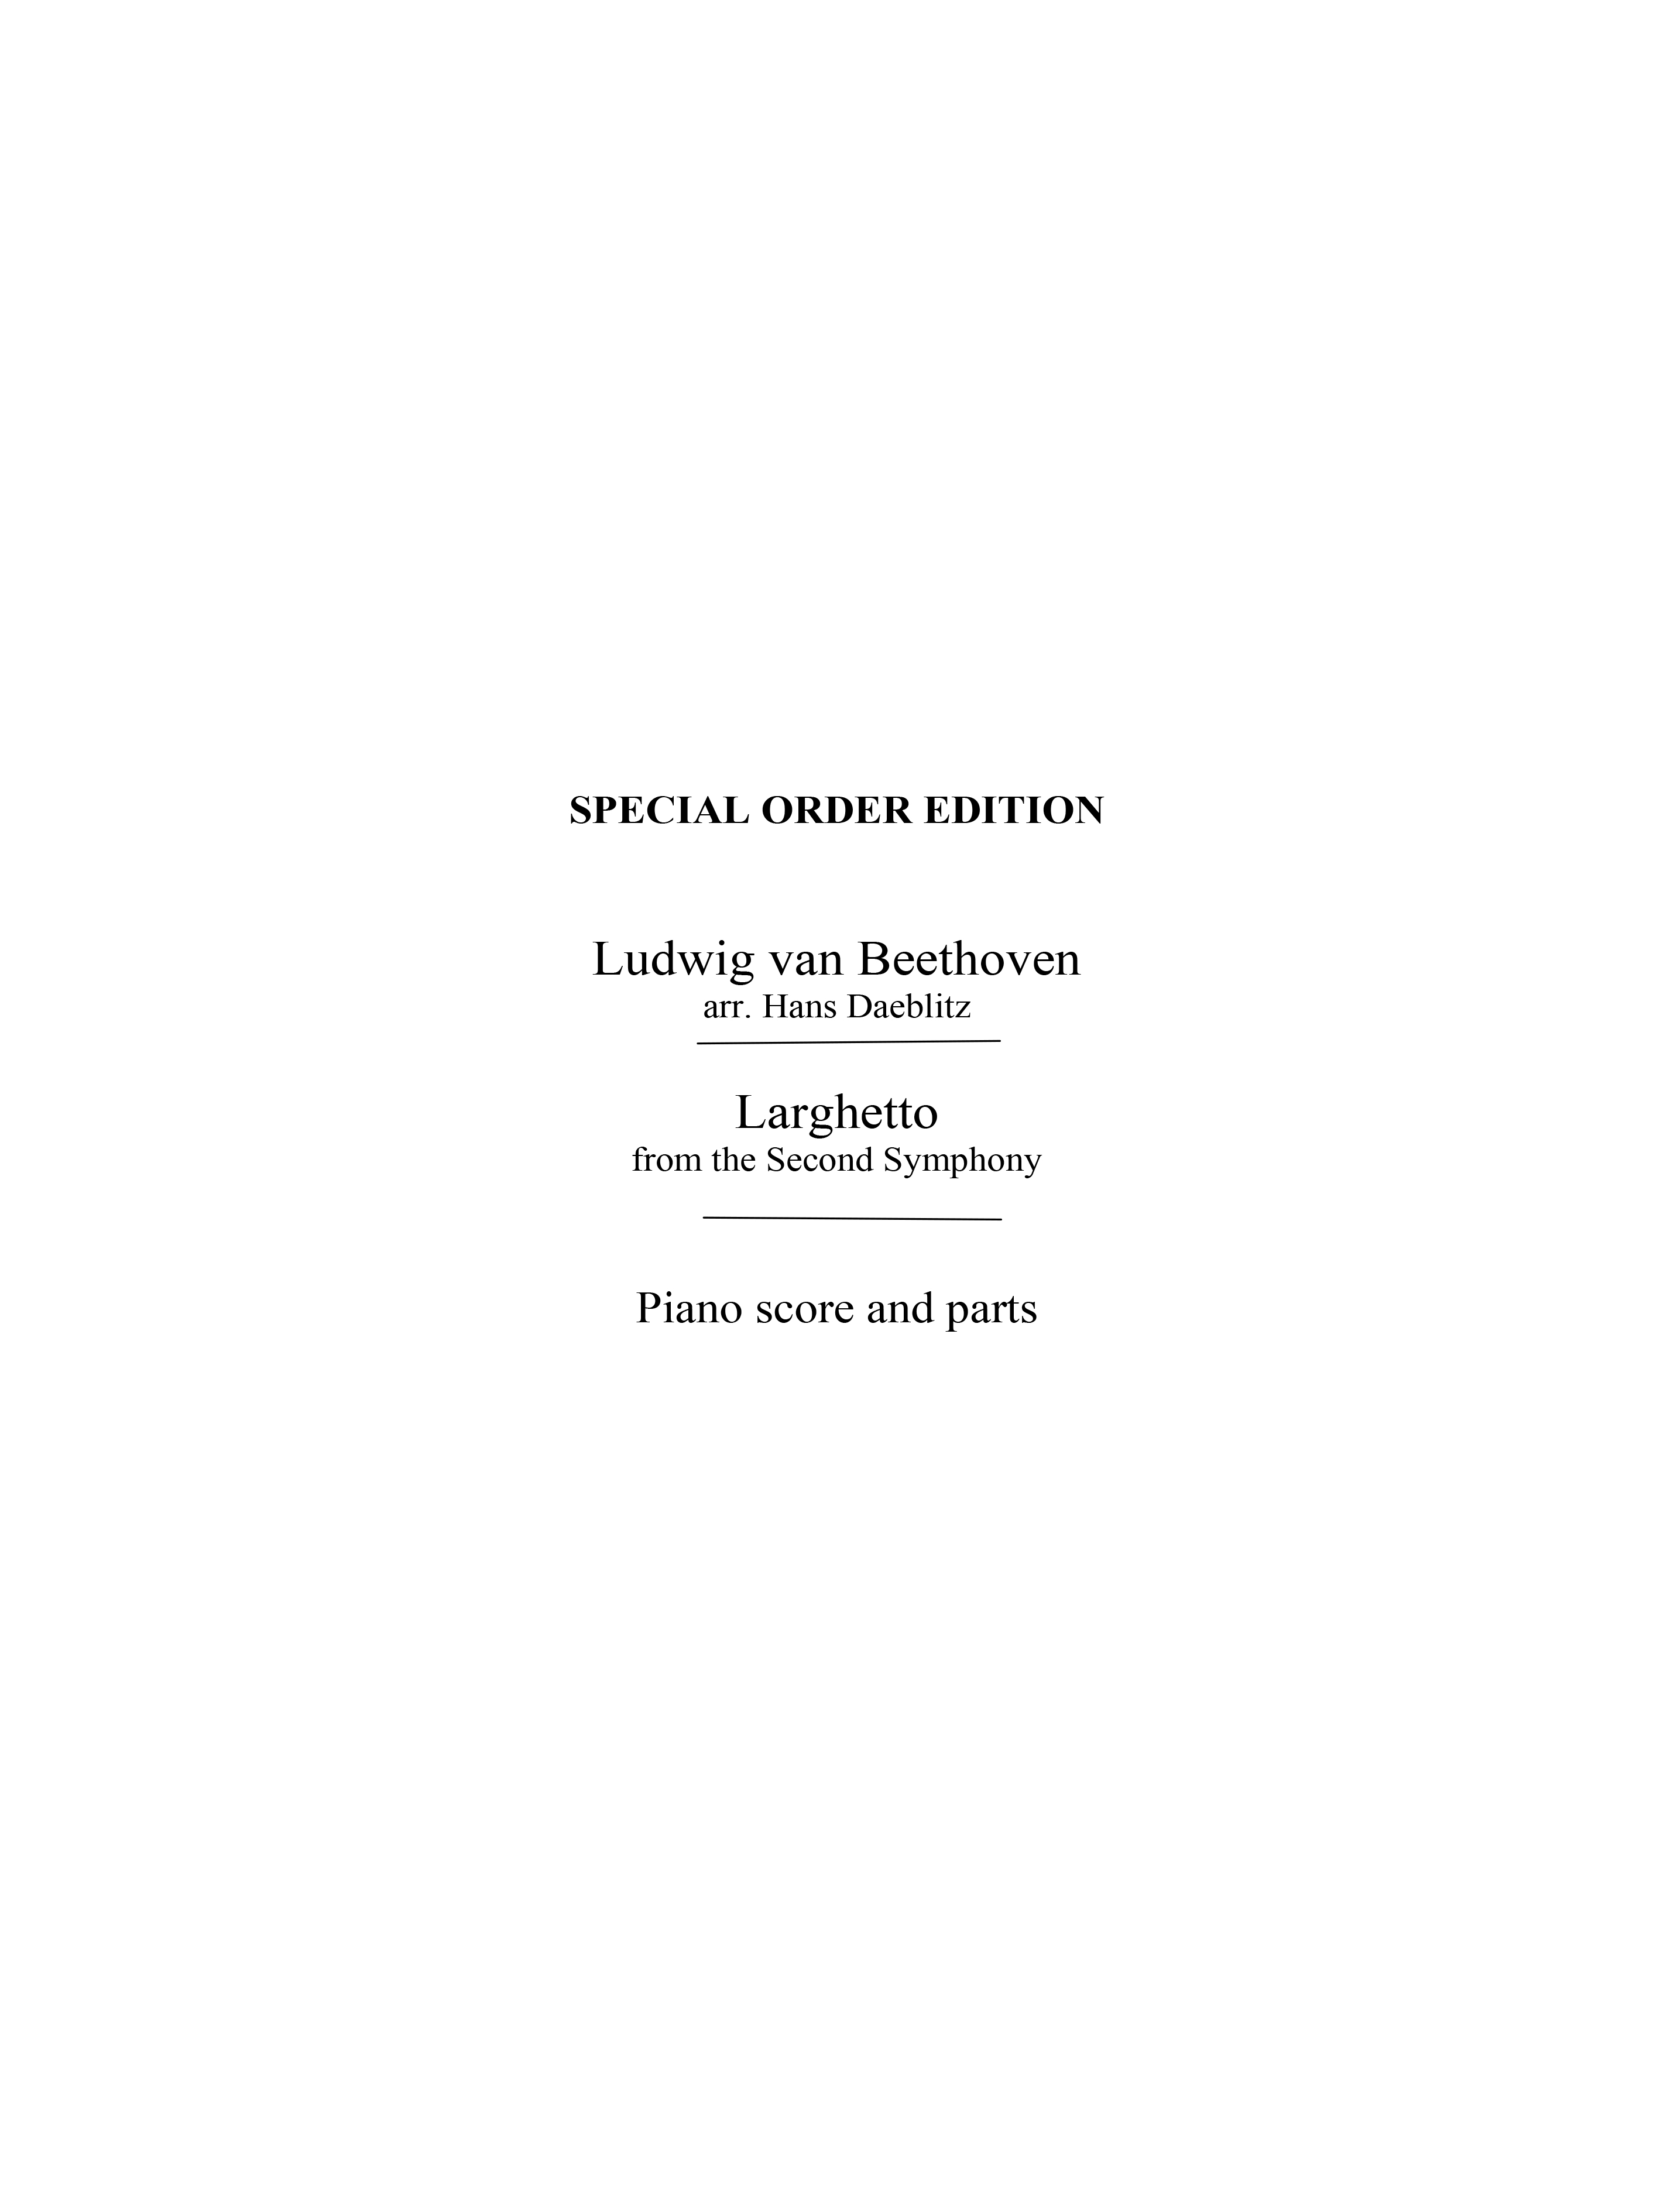 Ludwig van Beethoven: Larghetto From 2nd Symphony (Daeblitz): Orchestra: Score